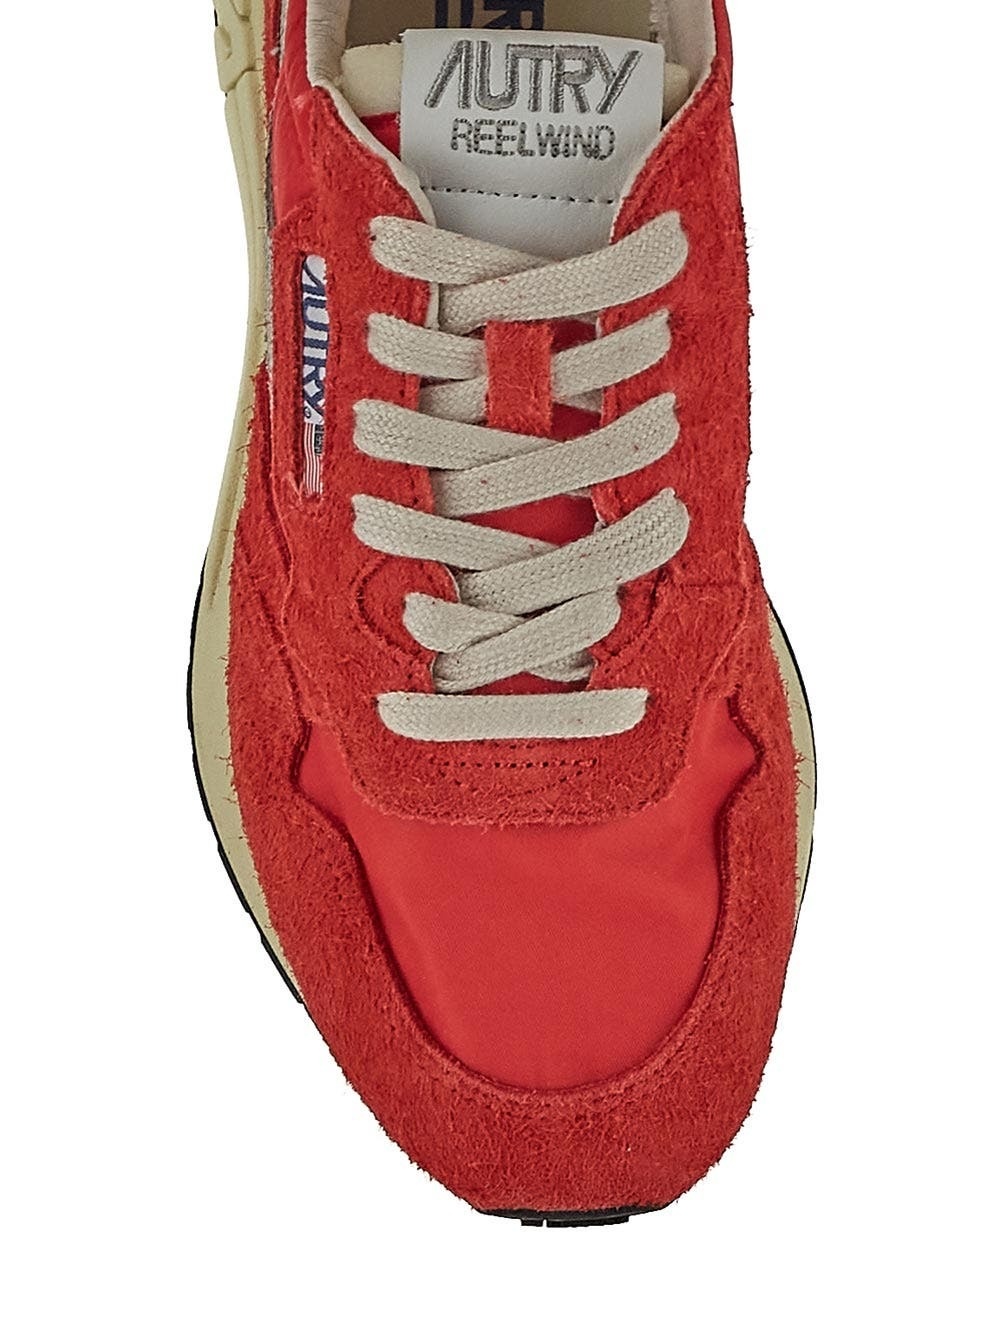 Autry Reelwind Low Sneakers Autry